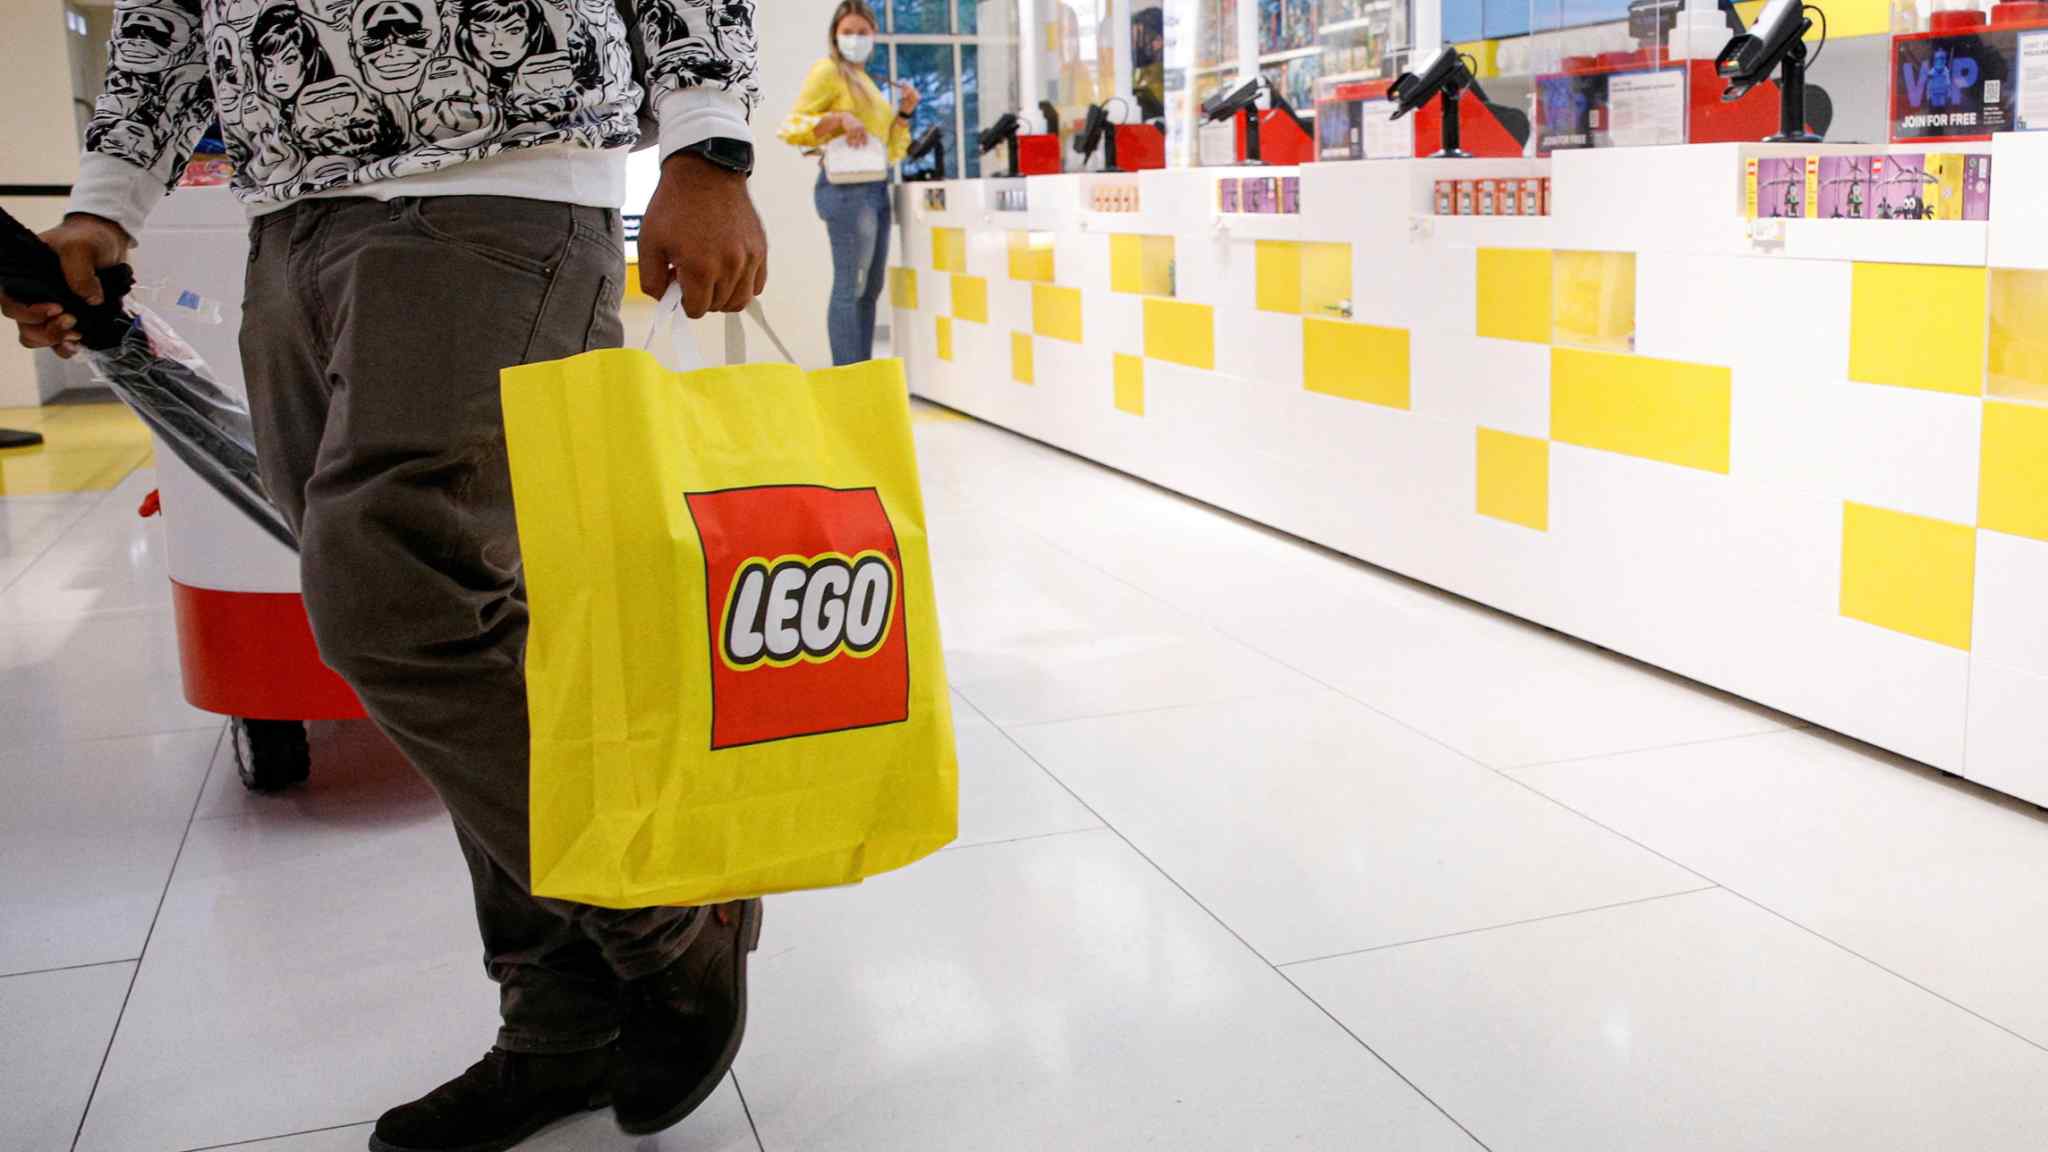 Lego expects to take market share in economic slowdown